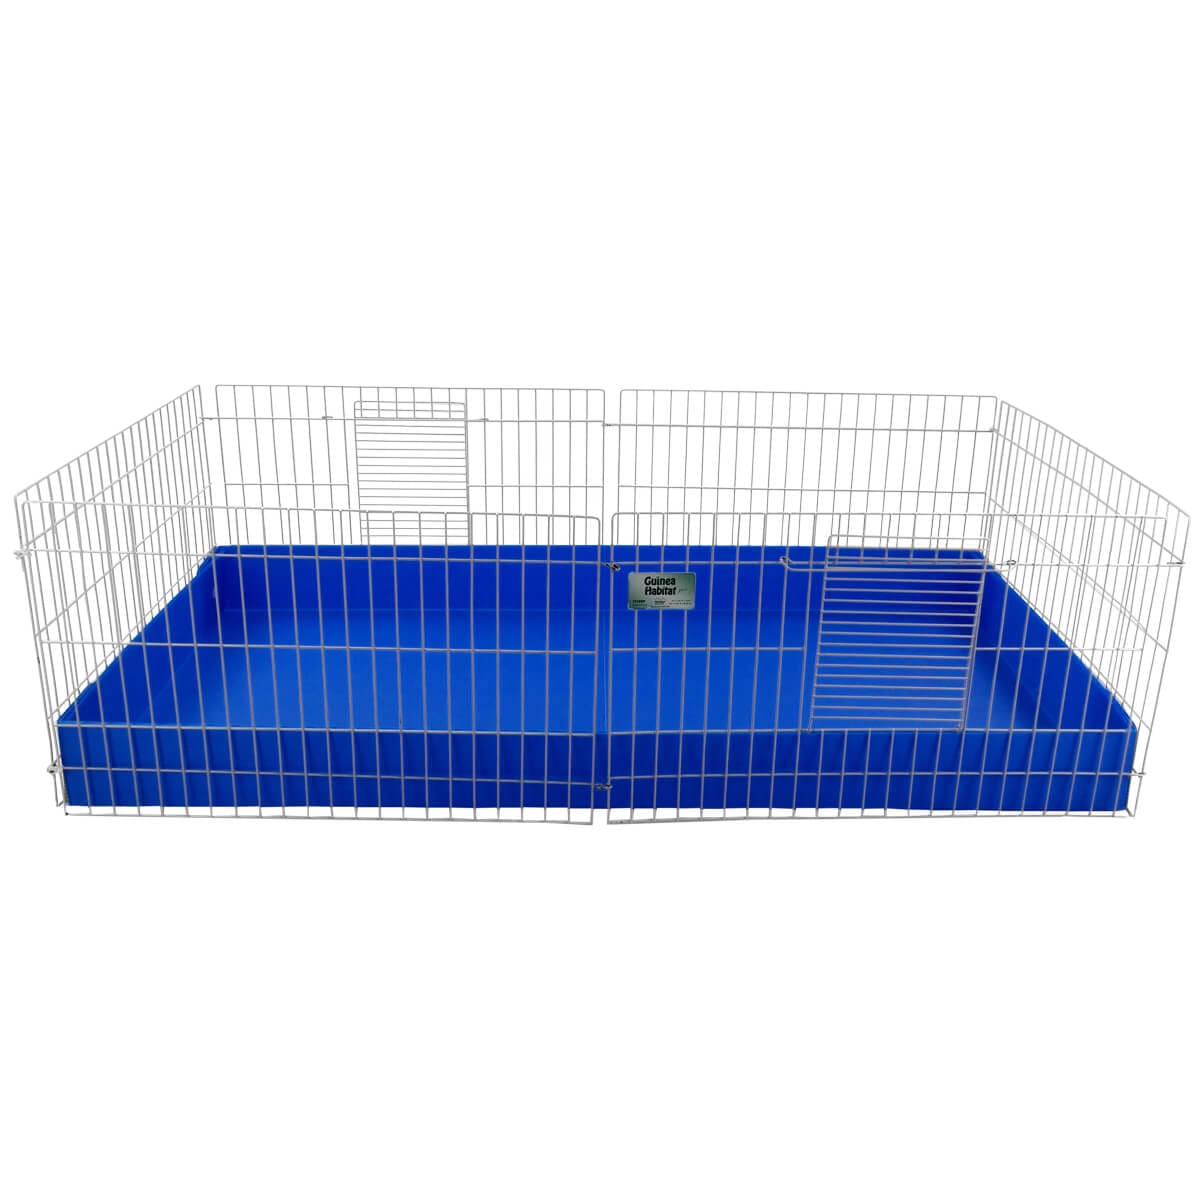 Royal blue coroplast base for a midwest guinea pig cage